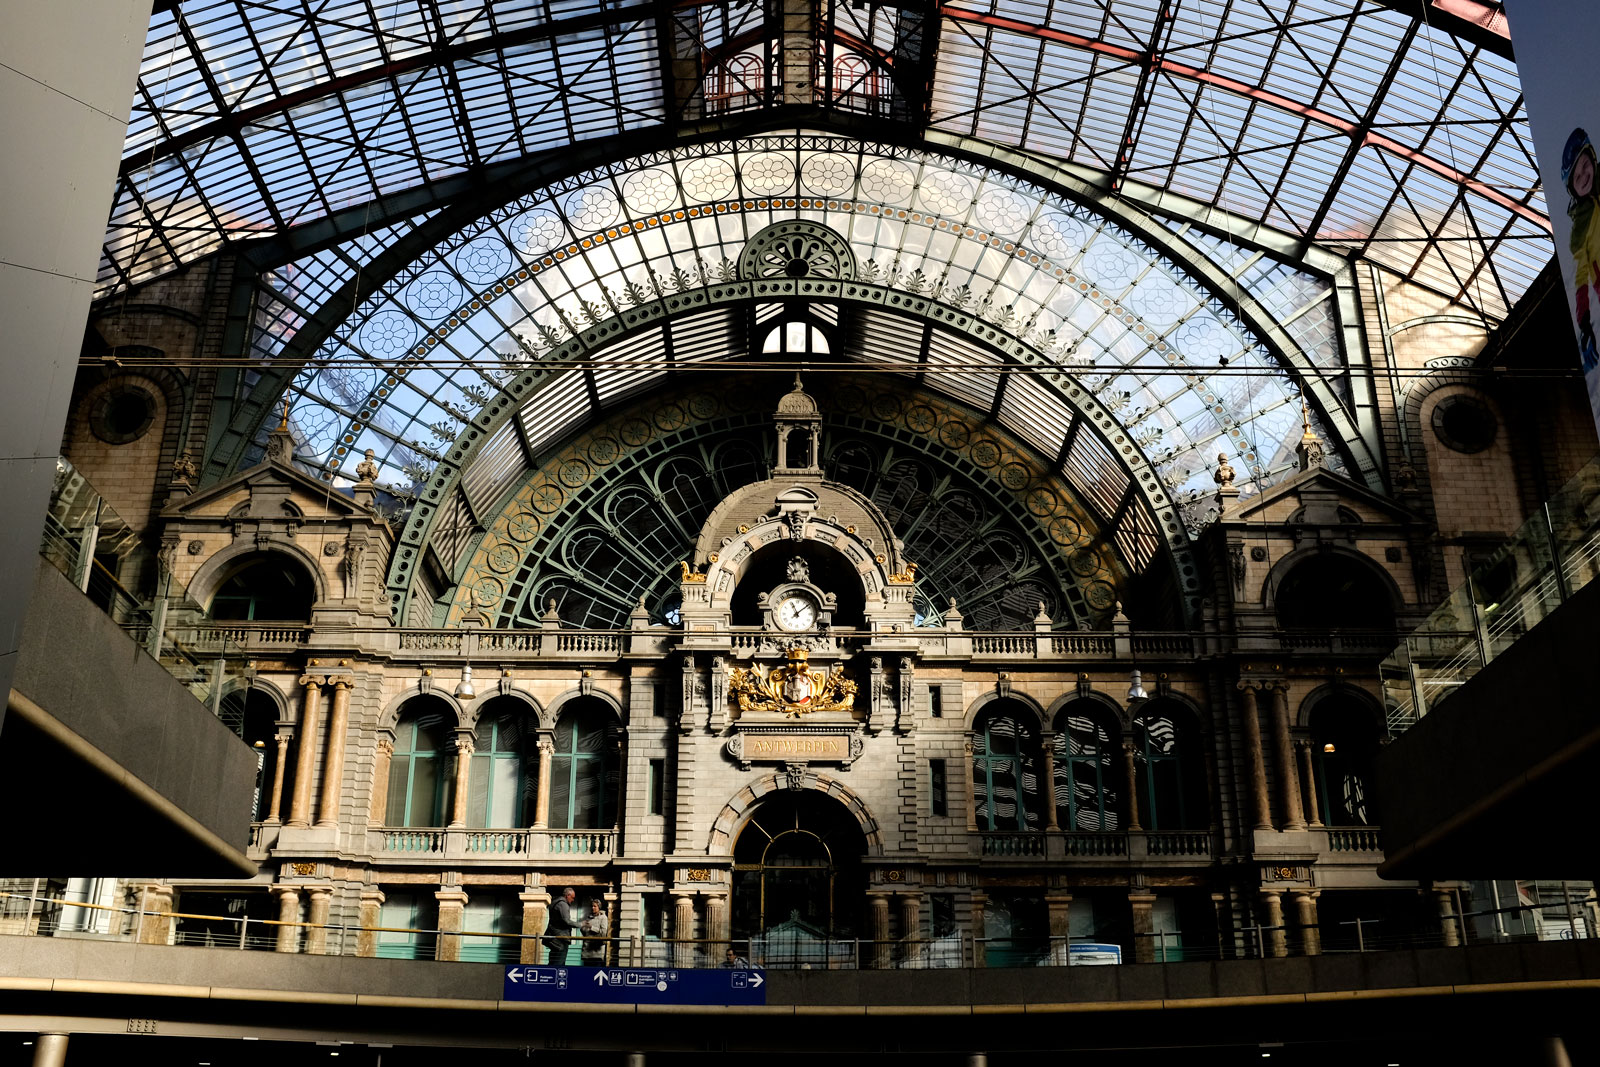 A view of the ornate Antwerp Centraal Station